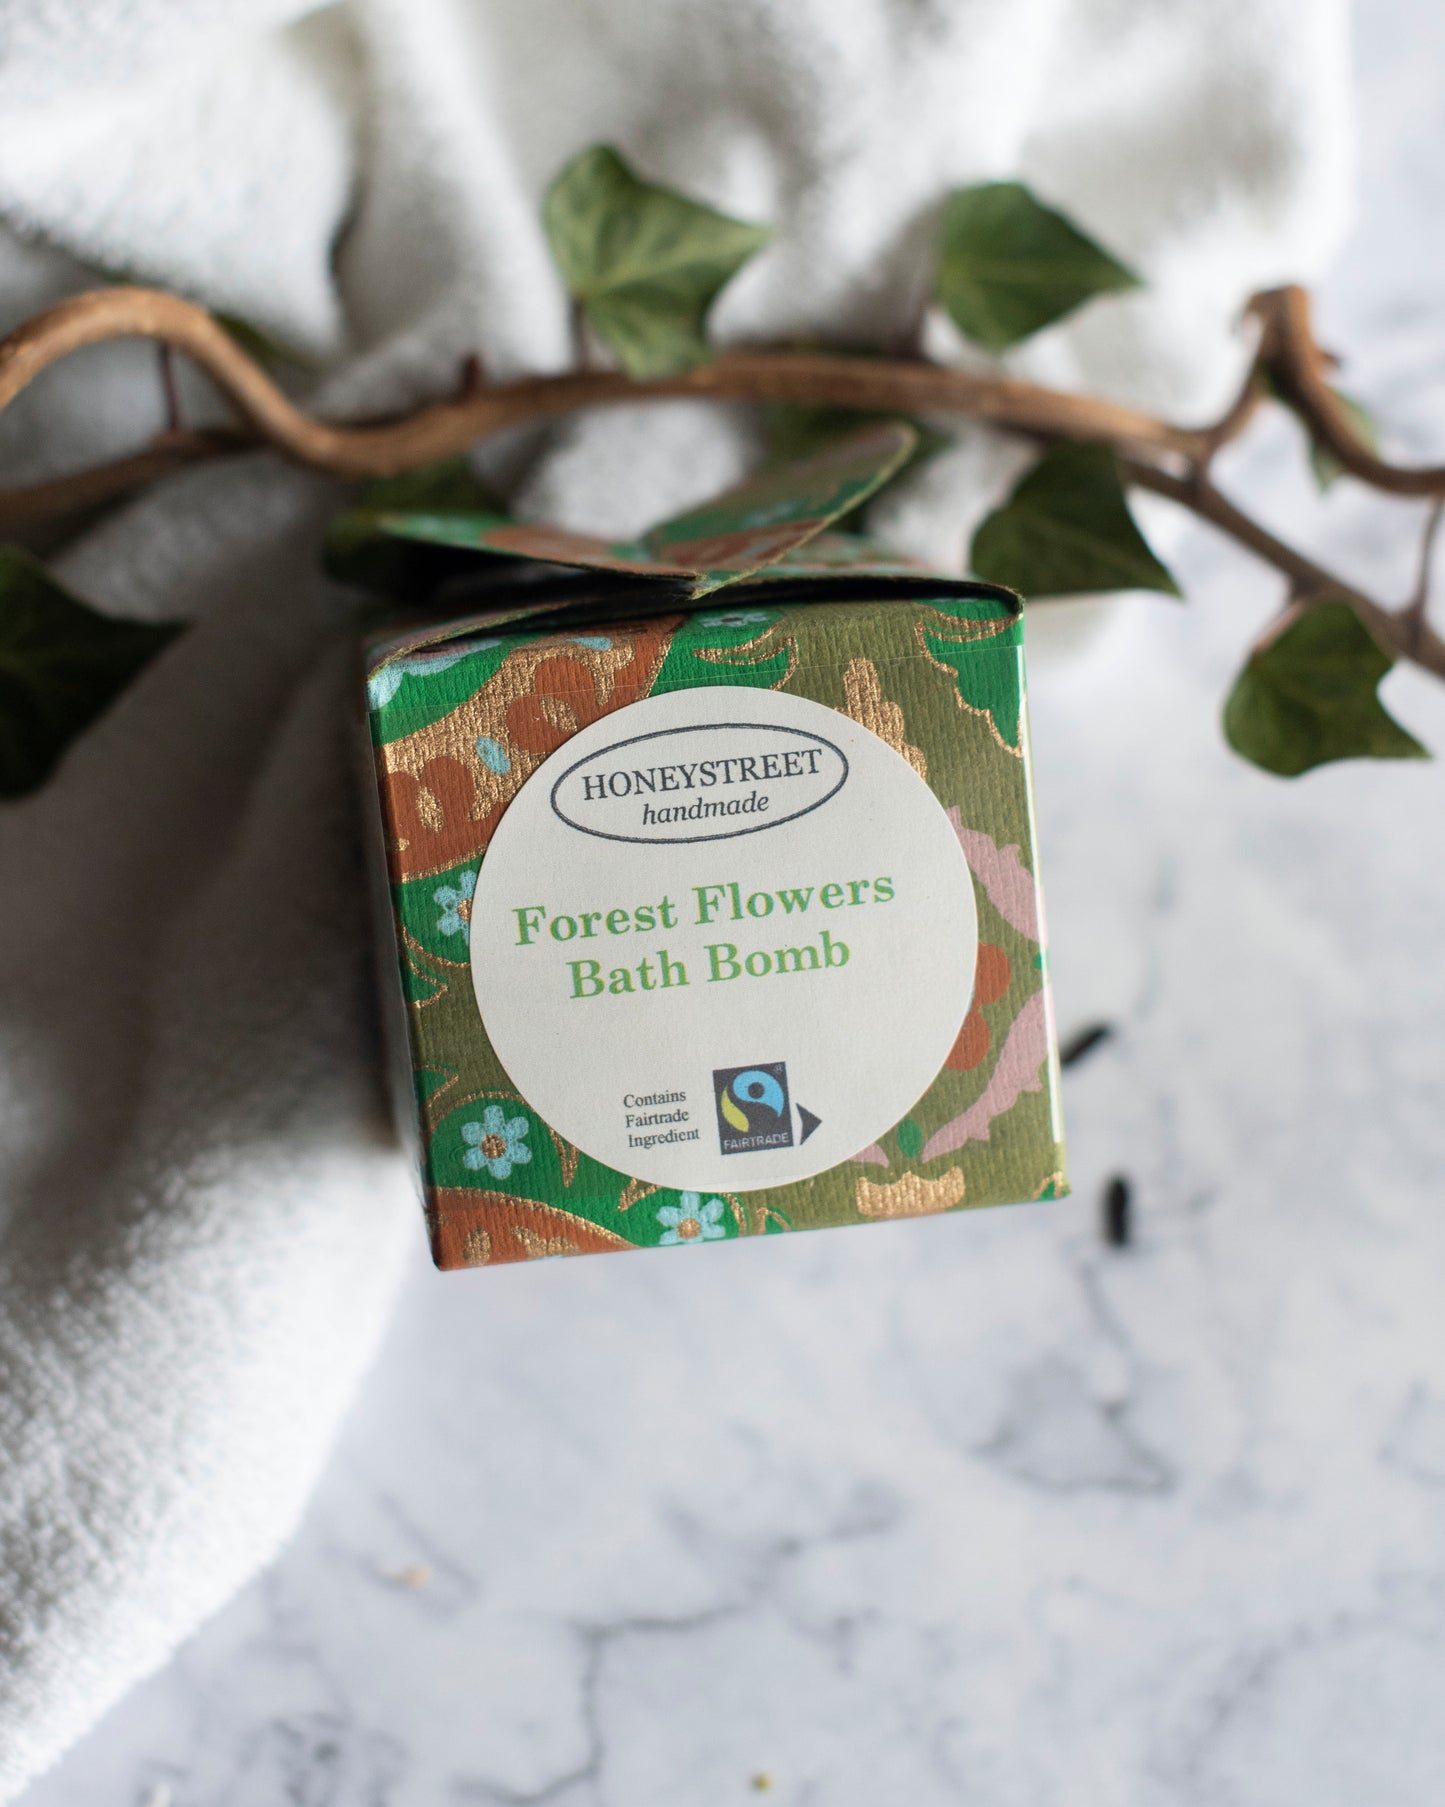 Forest Flowers Bath Bomb - The india Shop